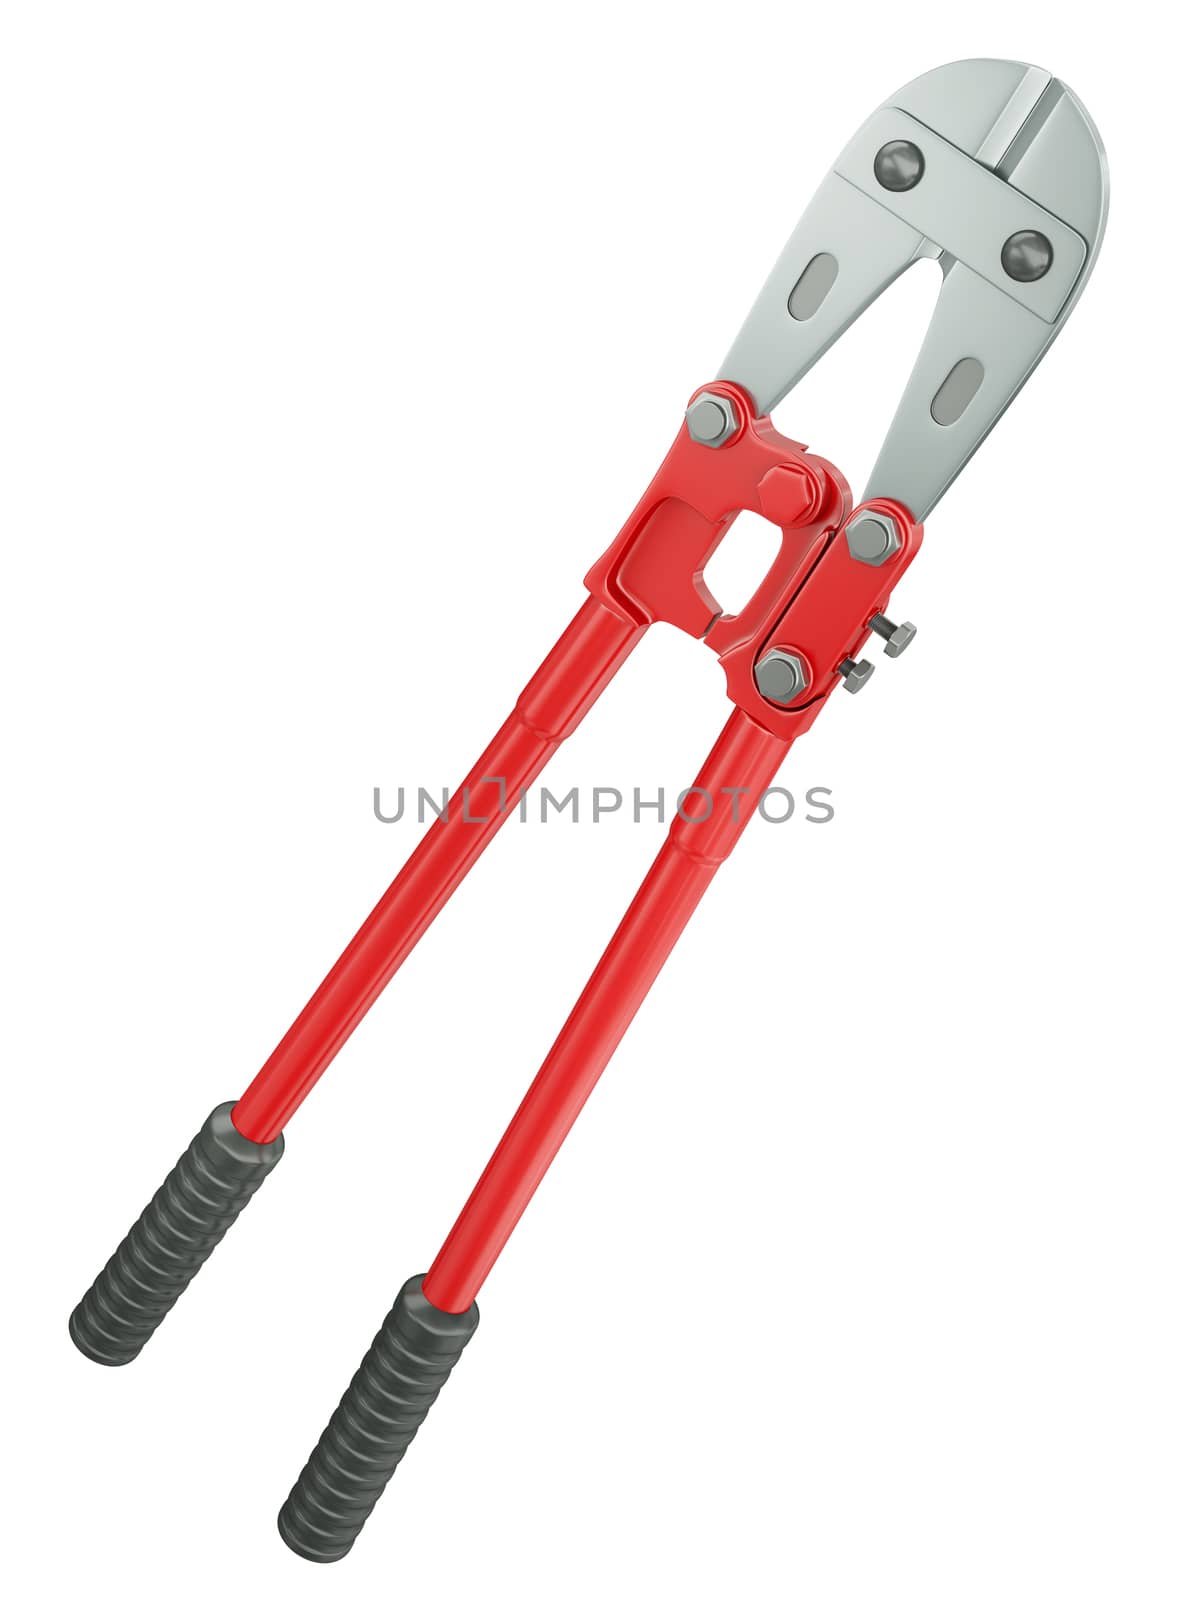 Bolt cutter by bayberry